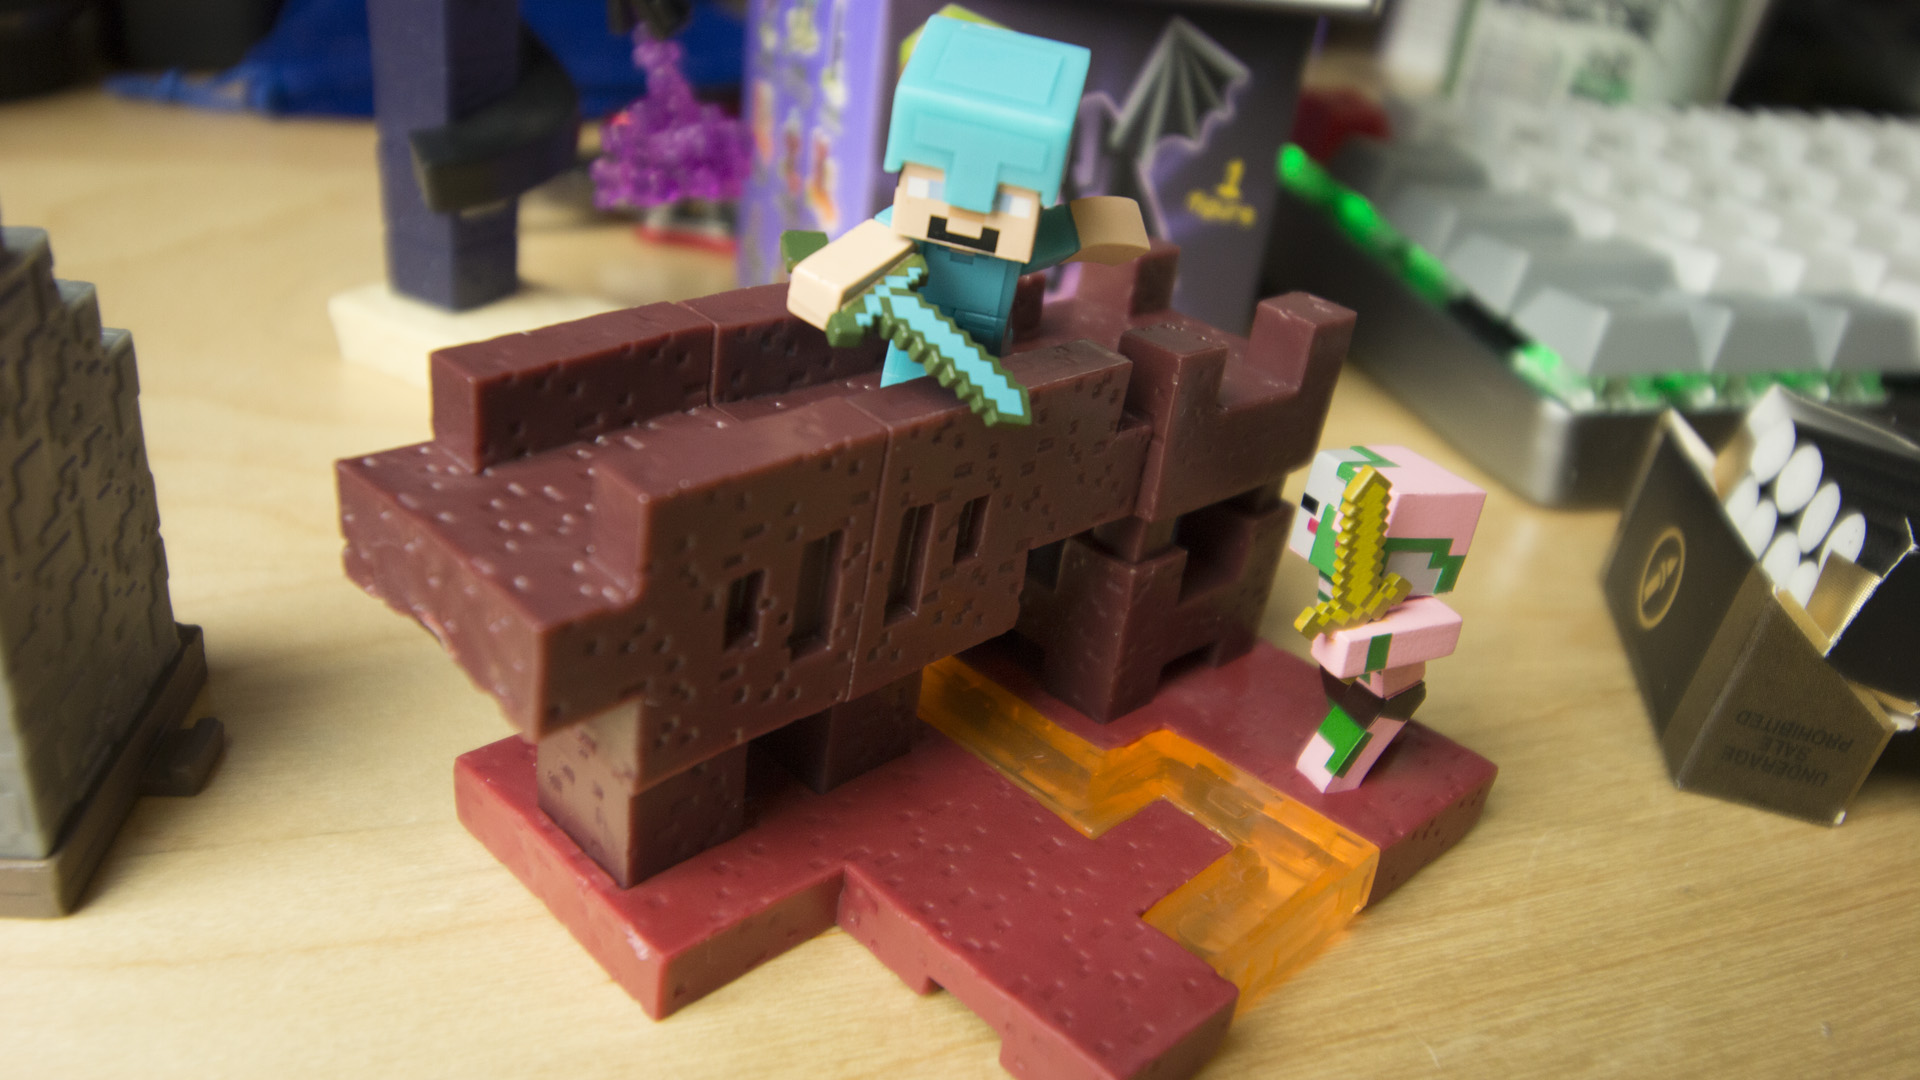 Mini Minecraft Building Sets Are Just Darling